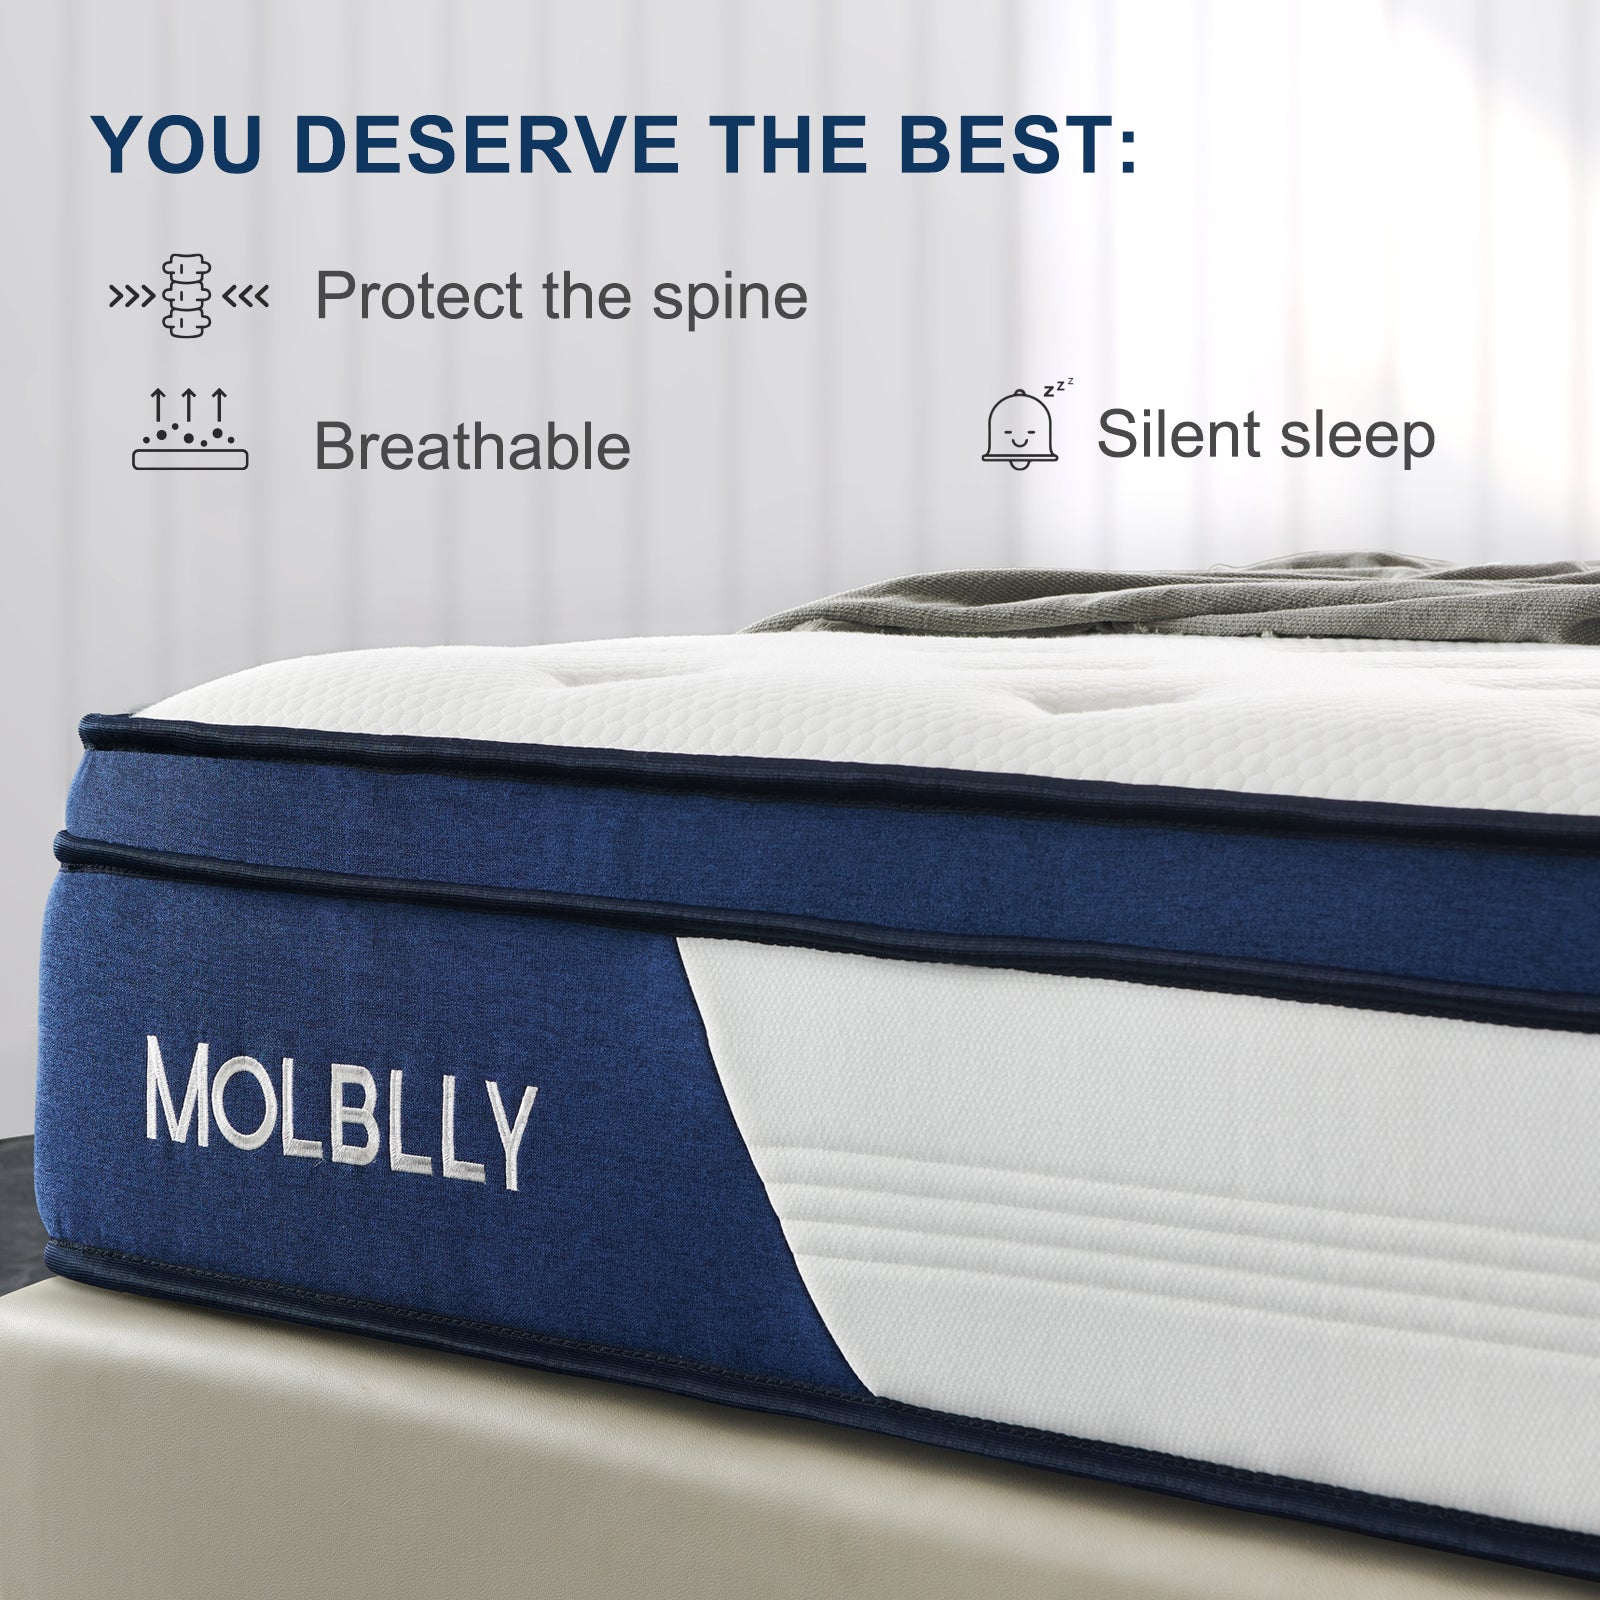 The springs of this mattress are separated into fiber pockets, allowing each spring to adjust independently to the body.